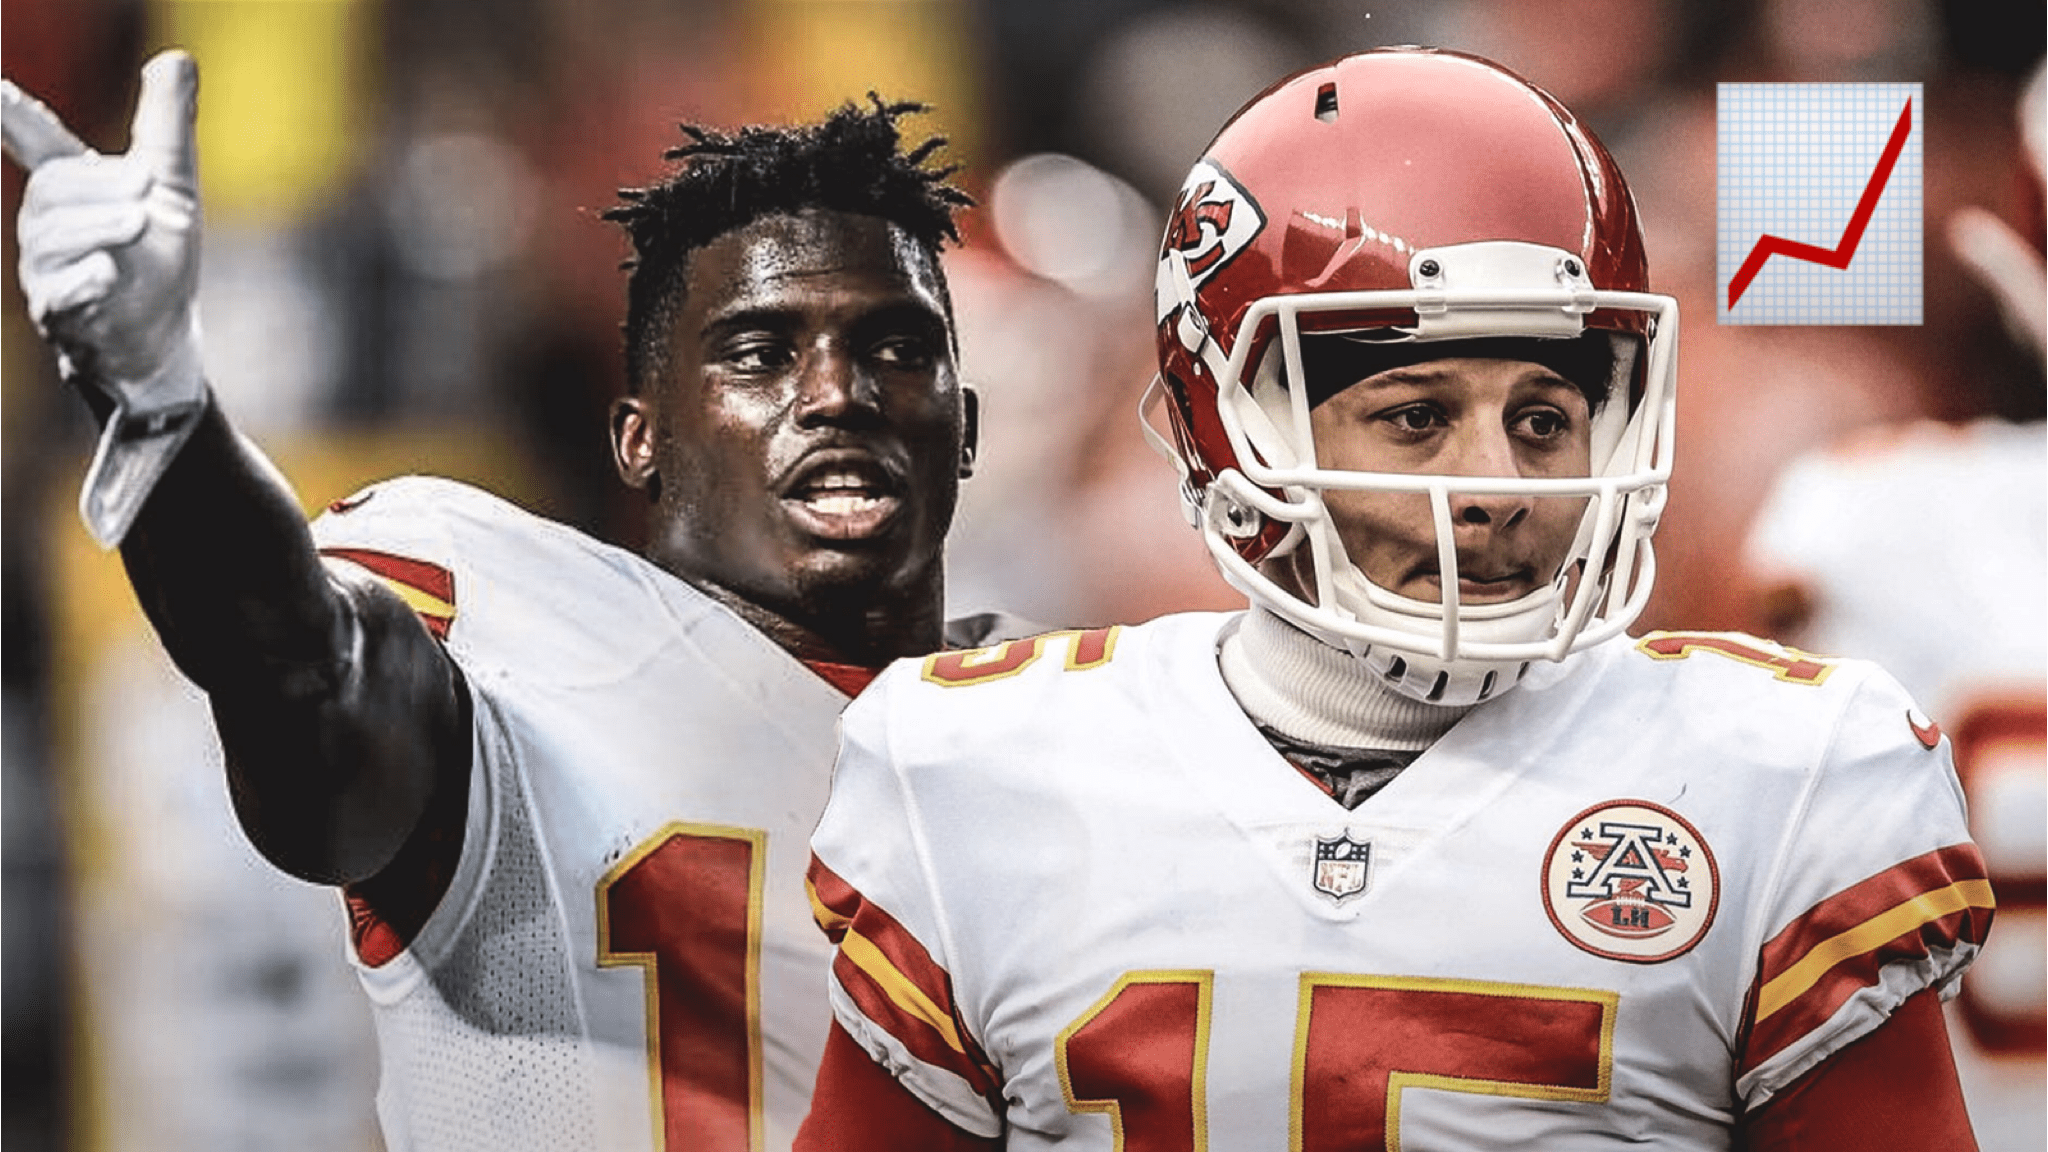 Deep Love: Patrick Mahomes Ropes A 69 Yard Bomb To Tyreek Hill, Rapport Growing Street Journal